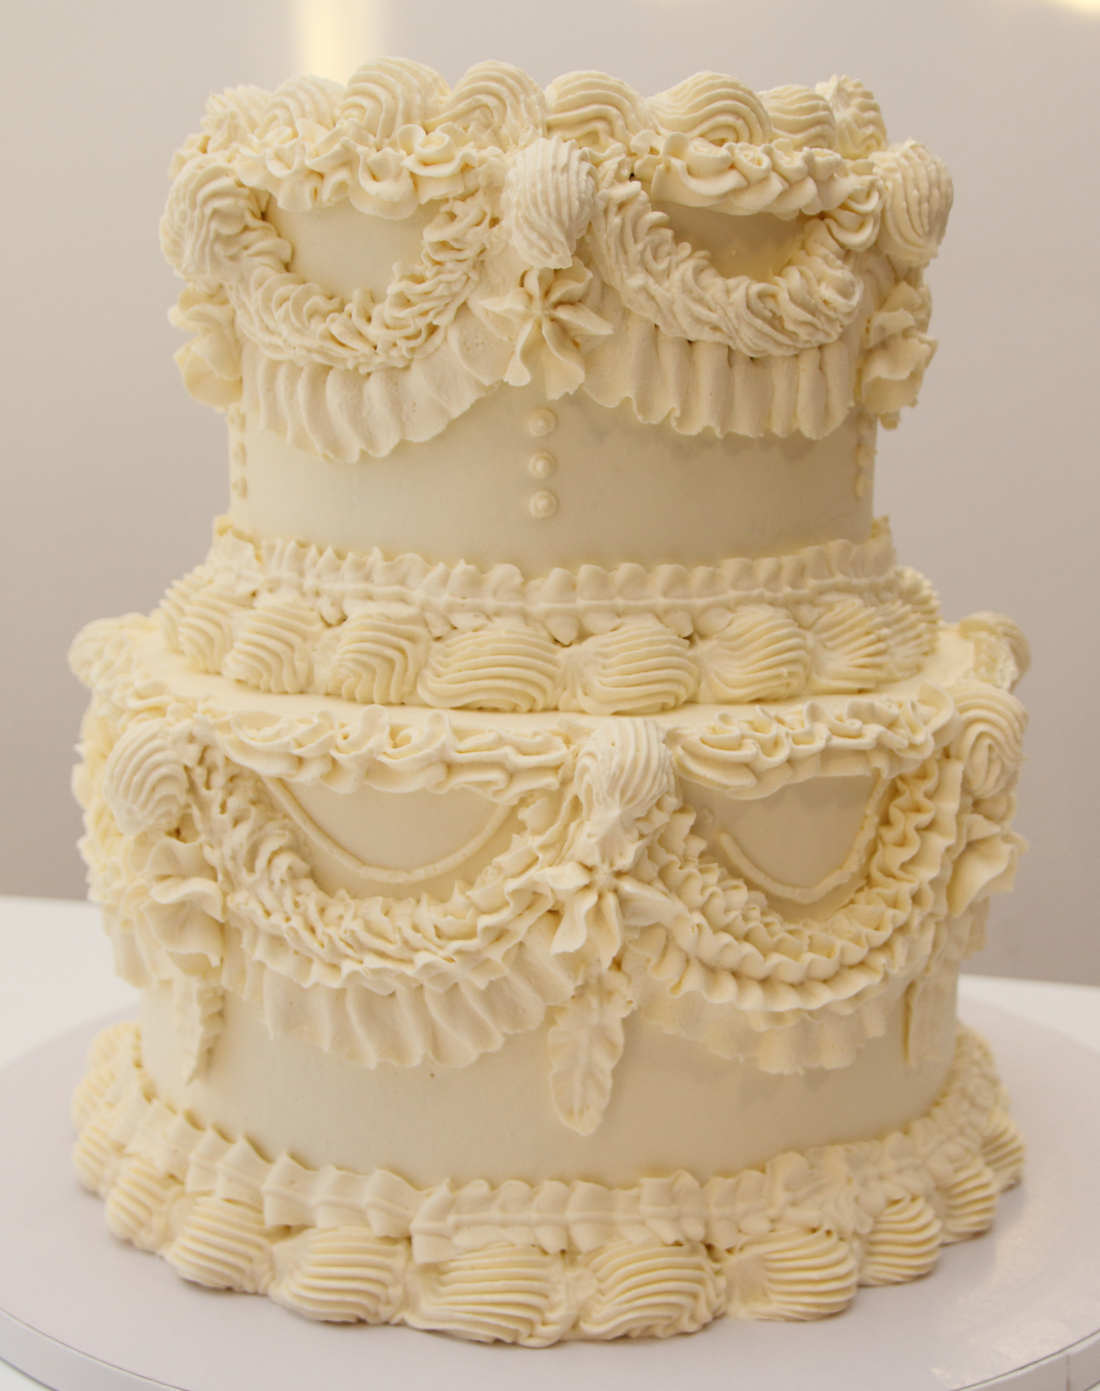 Two-tier wedding cake without sugar